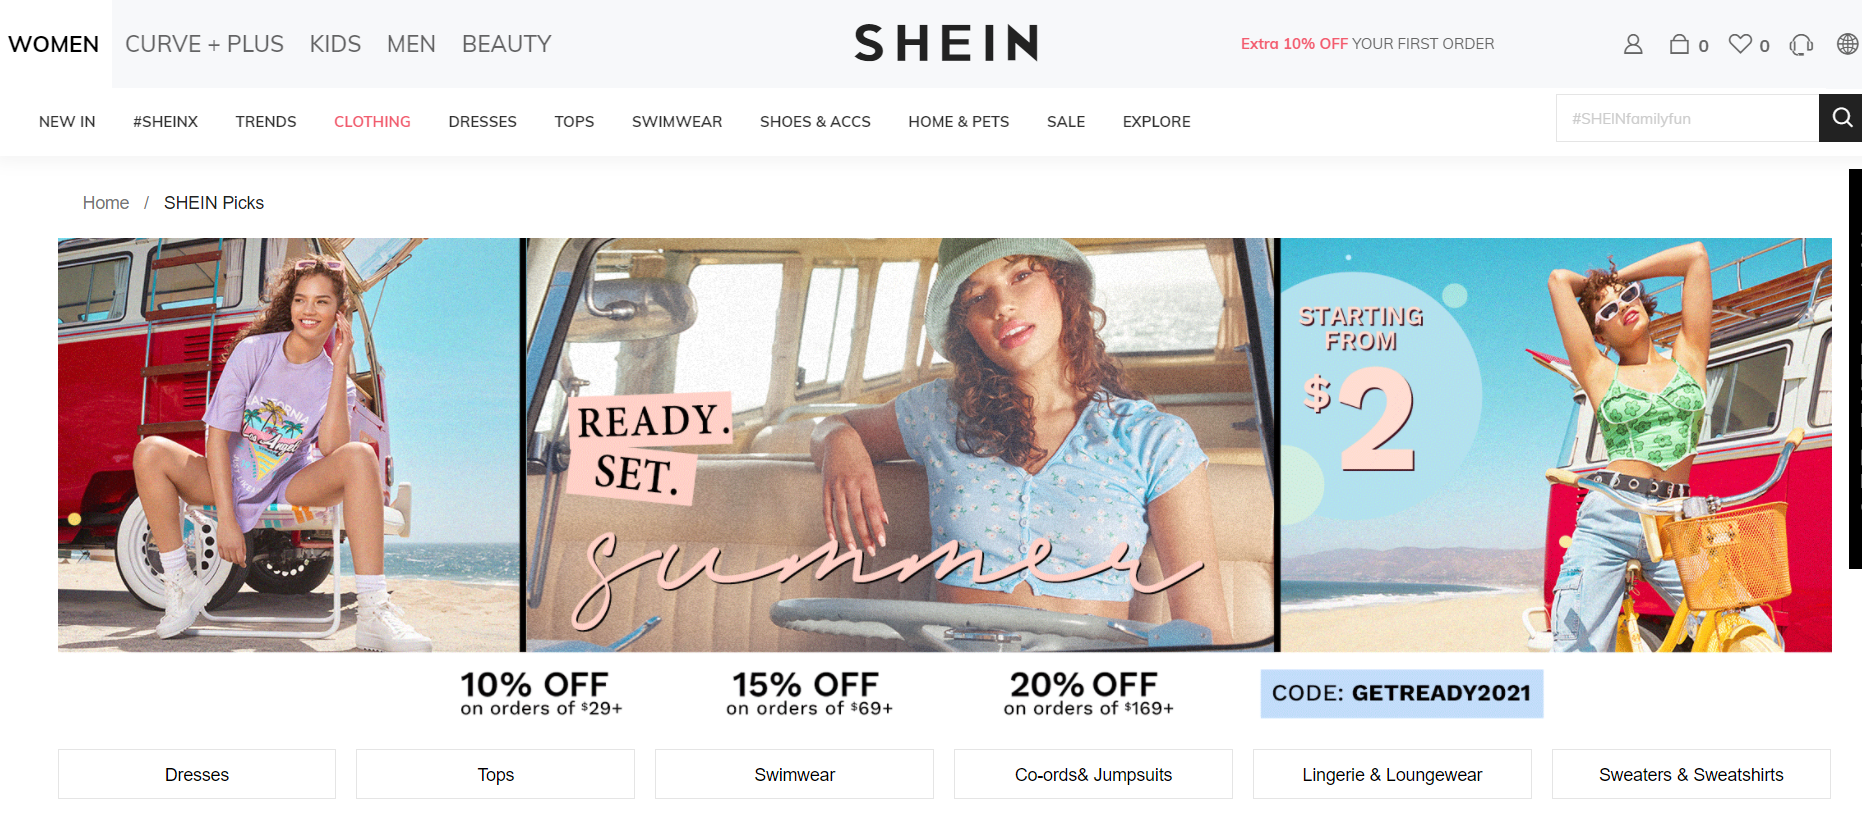 SheIn is one of the best sites like Alibaba